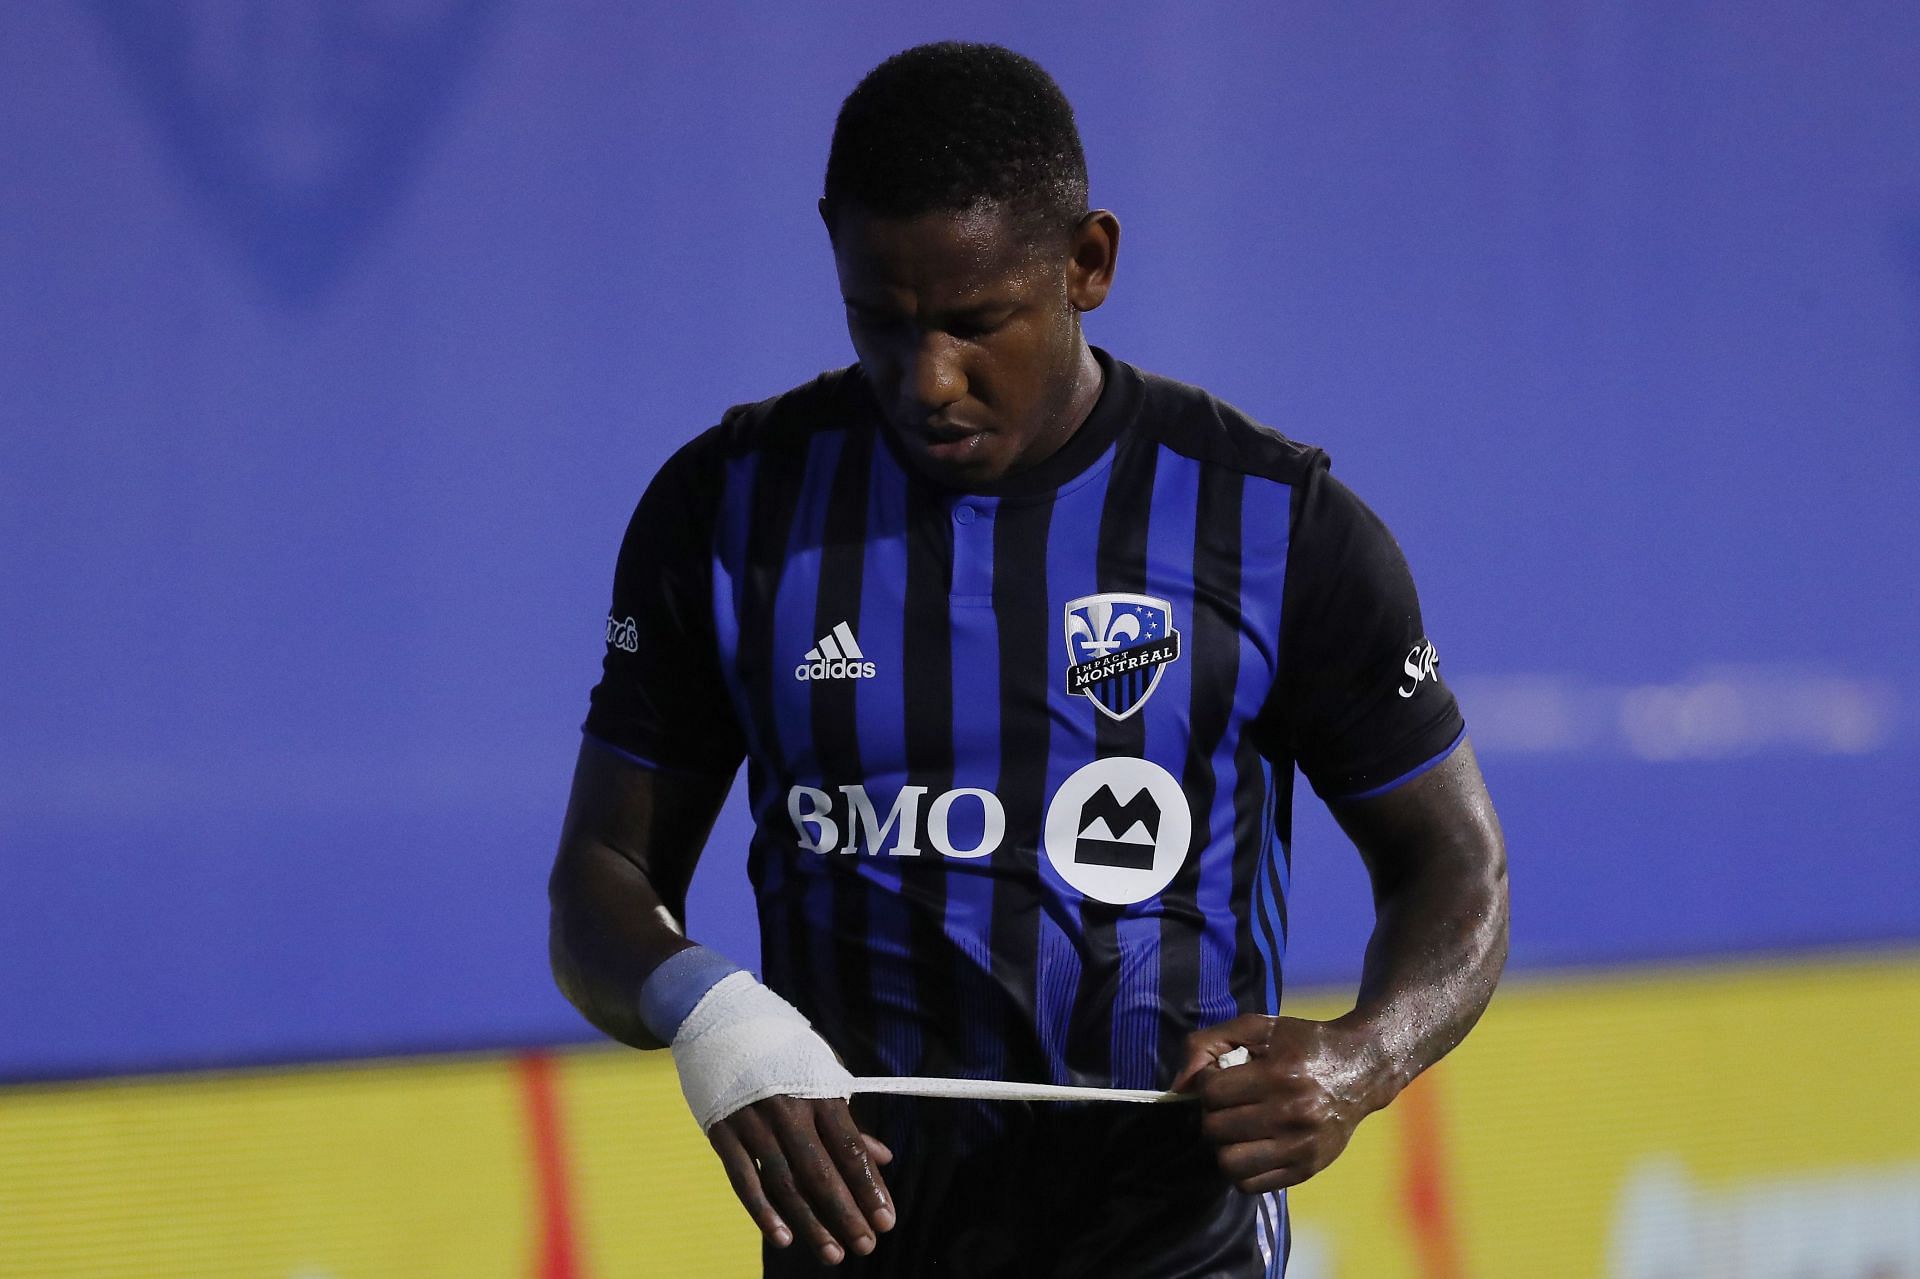 Quioto will be missing for Montreal